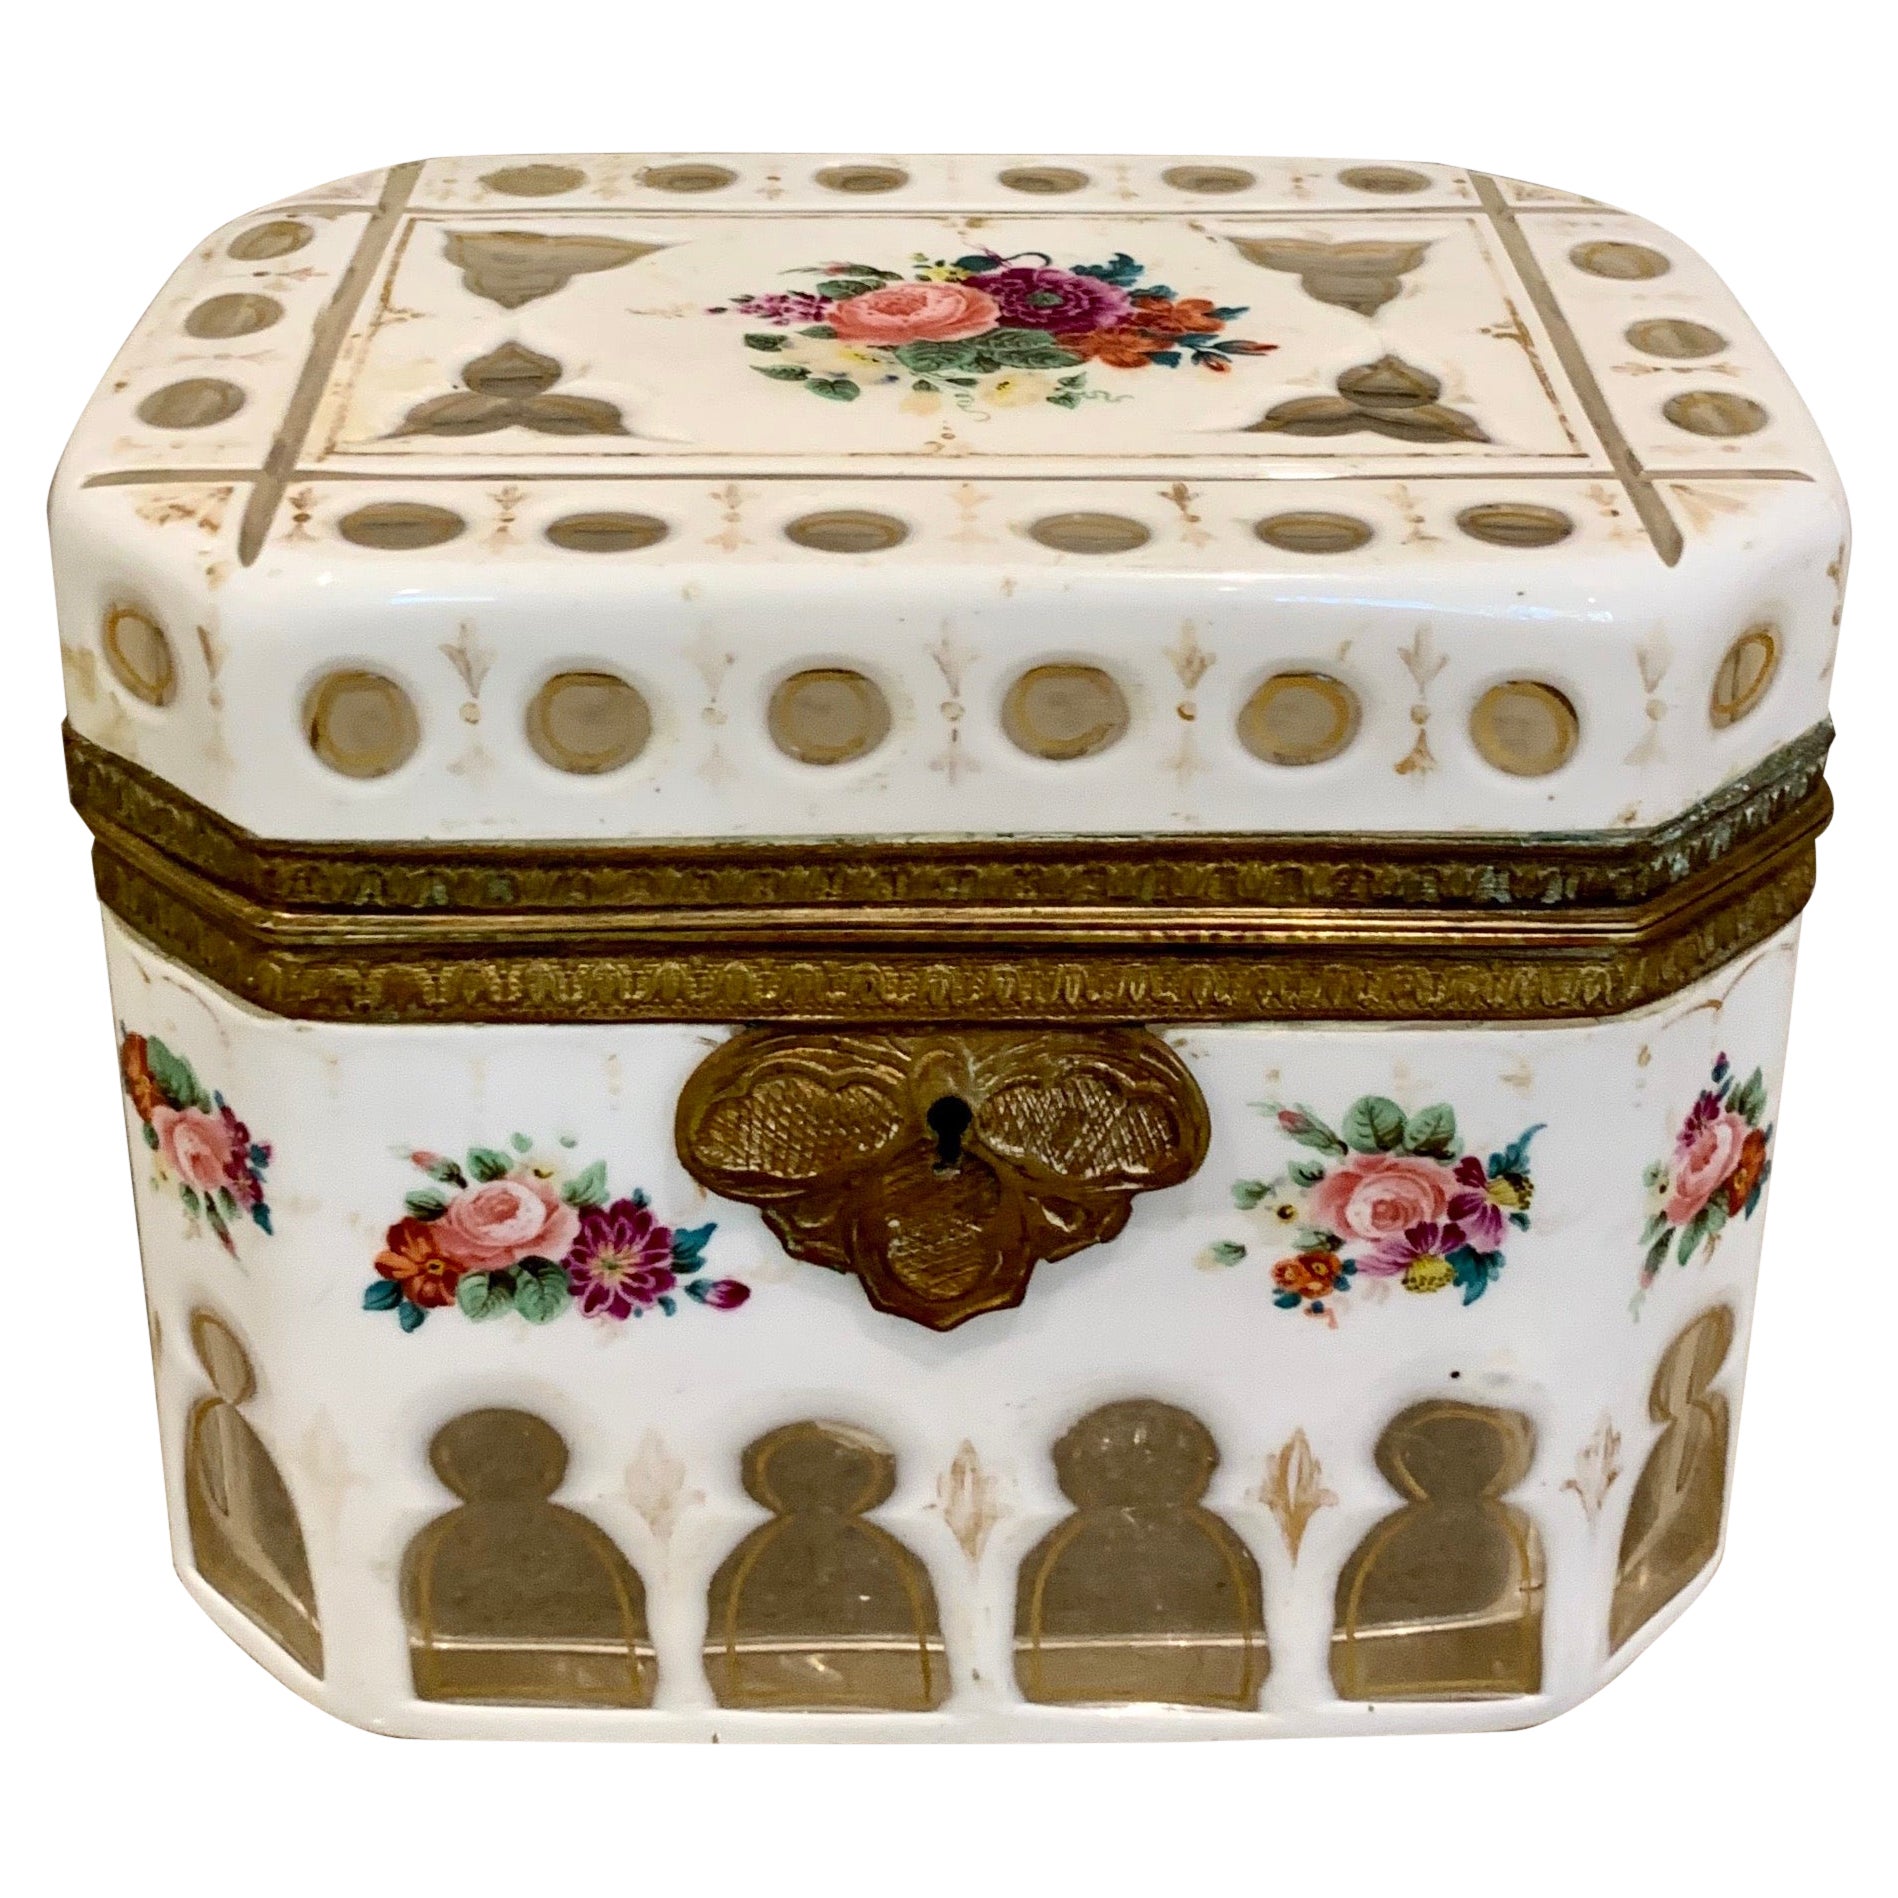 Superb Quality Bohemian White Overlay Floral Enamelled Casket / Box